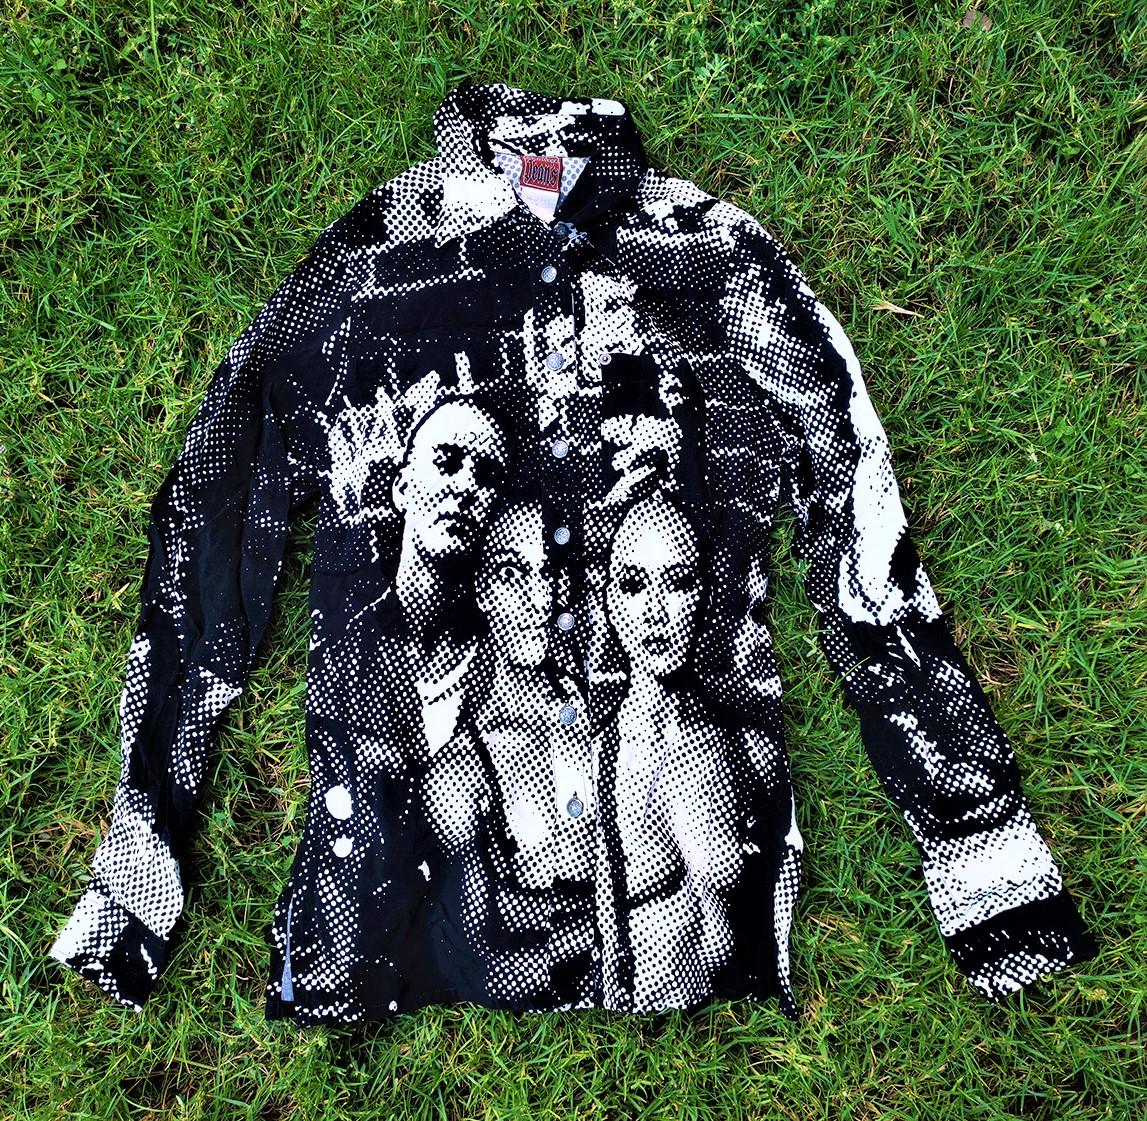 Iconic Collector Jean Paul Gaultier JPG Jean’s A/W97 Black White “Fight Racism” Punk Anarchy Graffiti Skinheads Shirt Blouse

Jean Paul Gaultier fitted t-shirt in the iconic Fight Racism print with images of anarchy sig bricks, anarchy signs, and